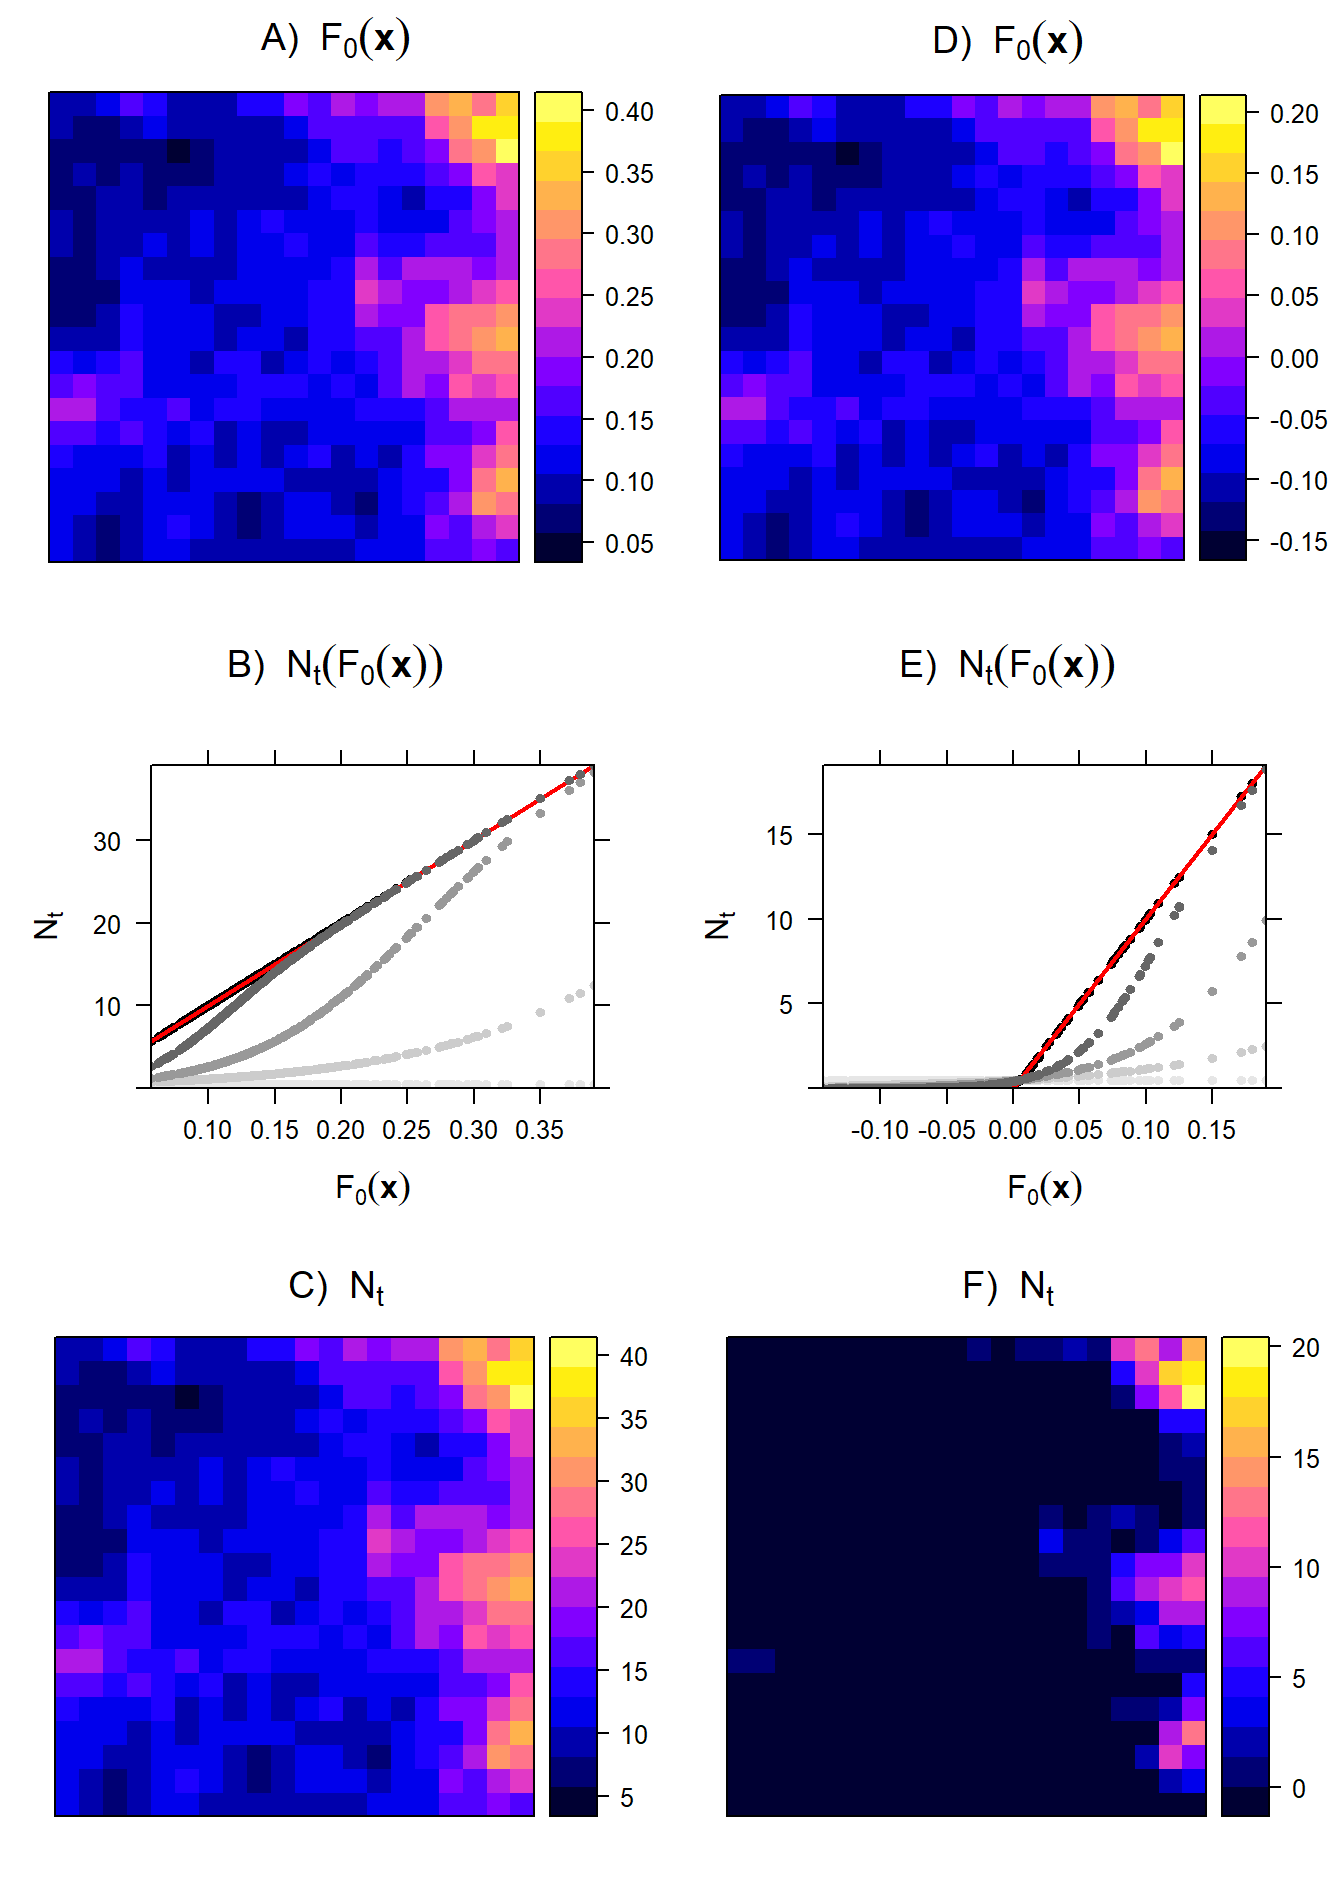 Simulation of an ideal life-history organism: We set out to visualize the relationship between fitness and distribution during the growth of a population from \(N_{\mathbf s,t=0}\approx0\) to the local equilibrium density \(N_{\mathbf s}^*\). The experienced fitness \(F_\mathbf x\) at low population size is defined as a linear function of a covariate \(X\) representing food. We explore two scenarios, one where \(F_\mathbf x\) is always positive across space (A) and one where \(F_\mathbf x\) can also be negative in some areas of space (D), achieved by subtracting a constant value from the original non-negative \(F_\mathbf x\). The population growth rate is defined as \(N_{\mathbf s,t+1}=N_{\mathbf s,t}\exp(F_\mathbf x -bN_{\mathbf s,t})\) where b=0.01. The simulation is run for 250 years. At the start of the simulation (\(t=0\)), the local population size \(N_{\mathbf s}\) is still independent of \(F_\mathbf x\) (light gray points, in B). Ultimately, the relationship will equilibrate to a linear relationship between local carrying capacity \(N_{\mathbf s}^*\) and \(F_{\mathbf x}\) (black points in B), with slope coefficient of \(1/b=100\) (red line in B)). The same applies to the scenario where \(F_\mathbf x\) can also be negative, but this will result in truncation of \(N_{\mathbf s}^*=0\) when \(F_{\mathbf x}\le 0\) (E). Spatial maps of \(N_{\mathbf s}^*\) are shown in C and F. Note that when a landscape contains locations with negative fitness (i.e. \(F_{\mathbf x}\le 0\)), this will result in the emergence of a patchy distribution of a species (F).